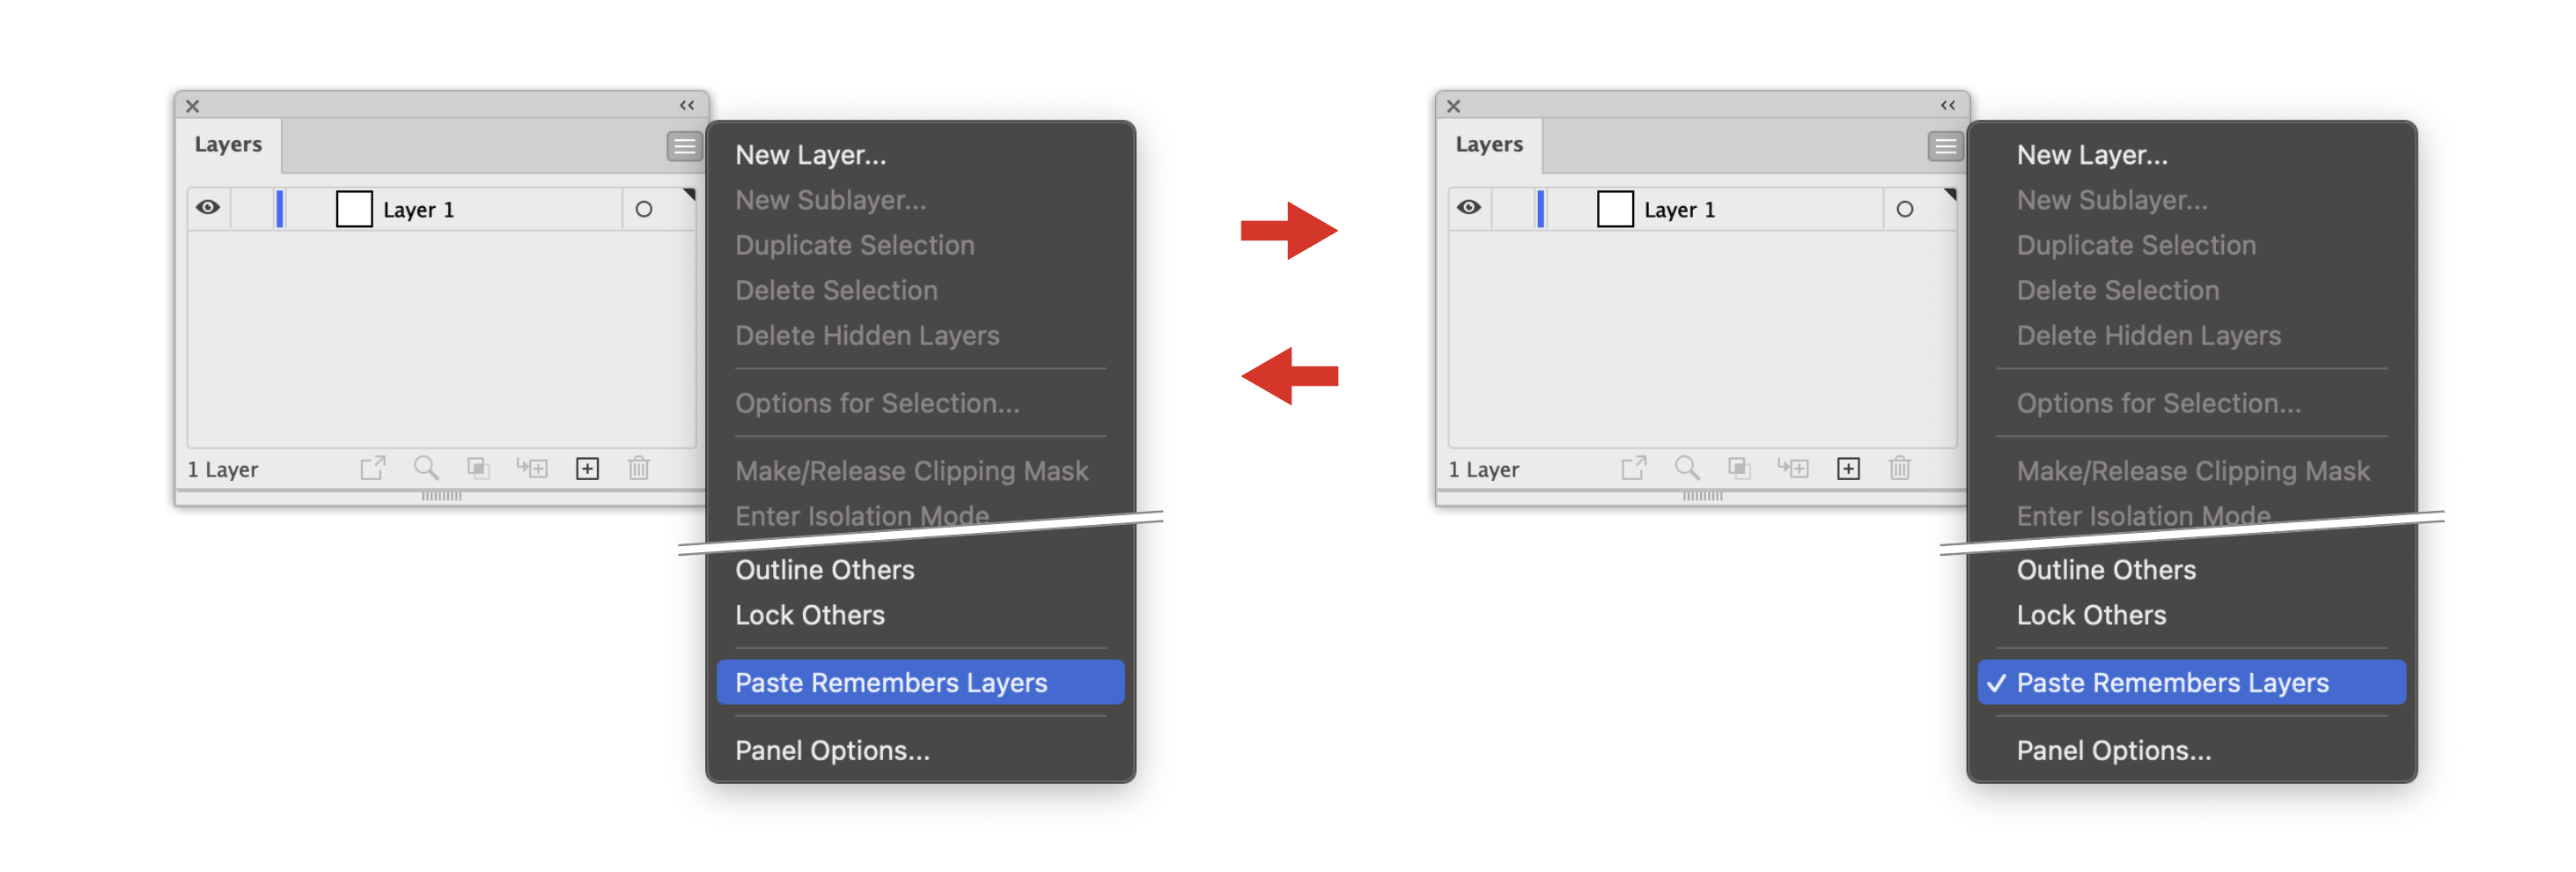 Toggle Paste Remembers Layers